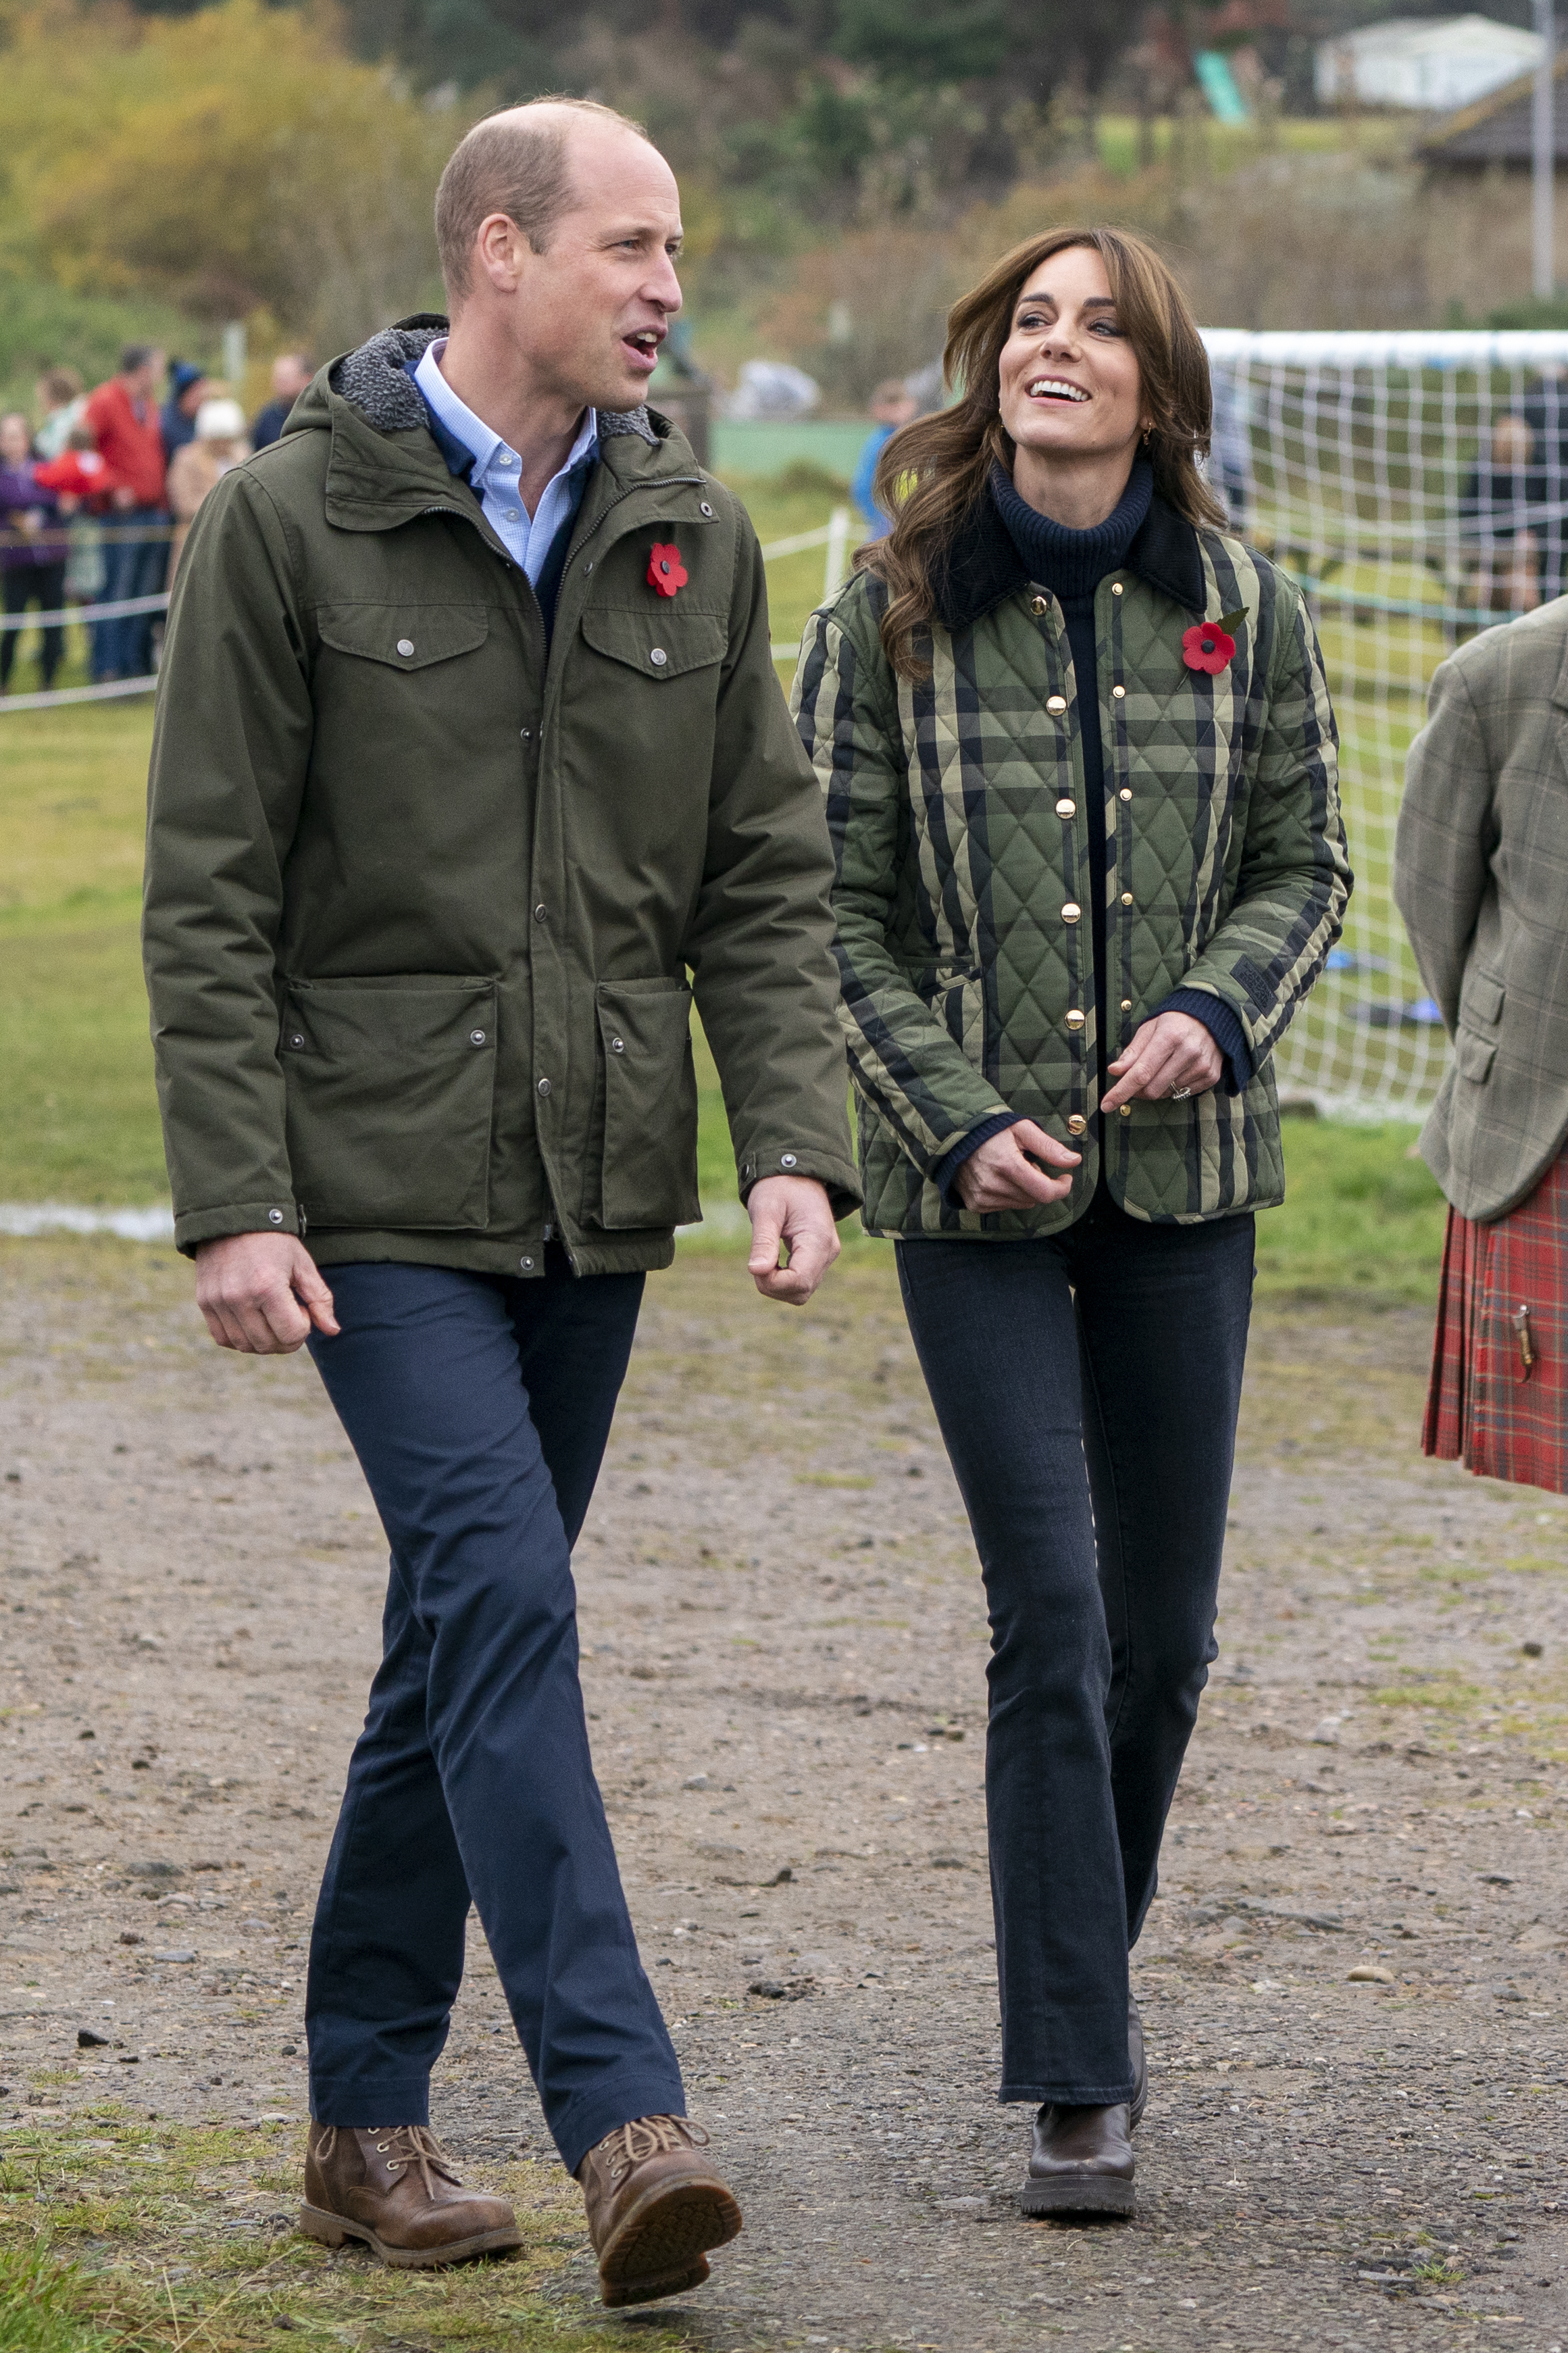 Princess Catherine and Prince William at Outfit Moray, a charity in Scotland